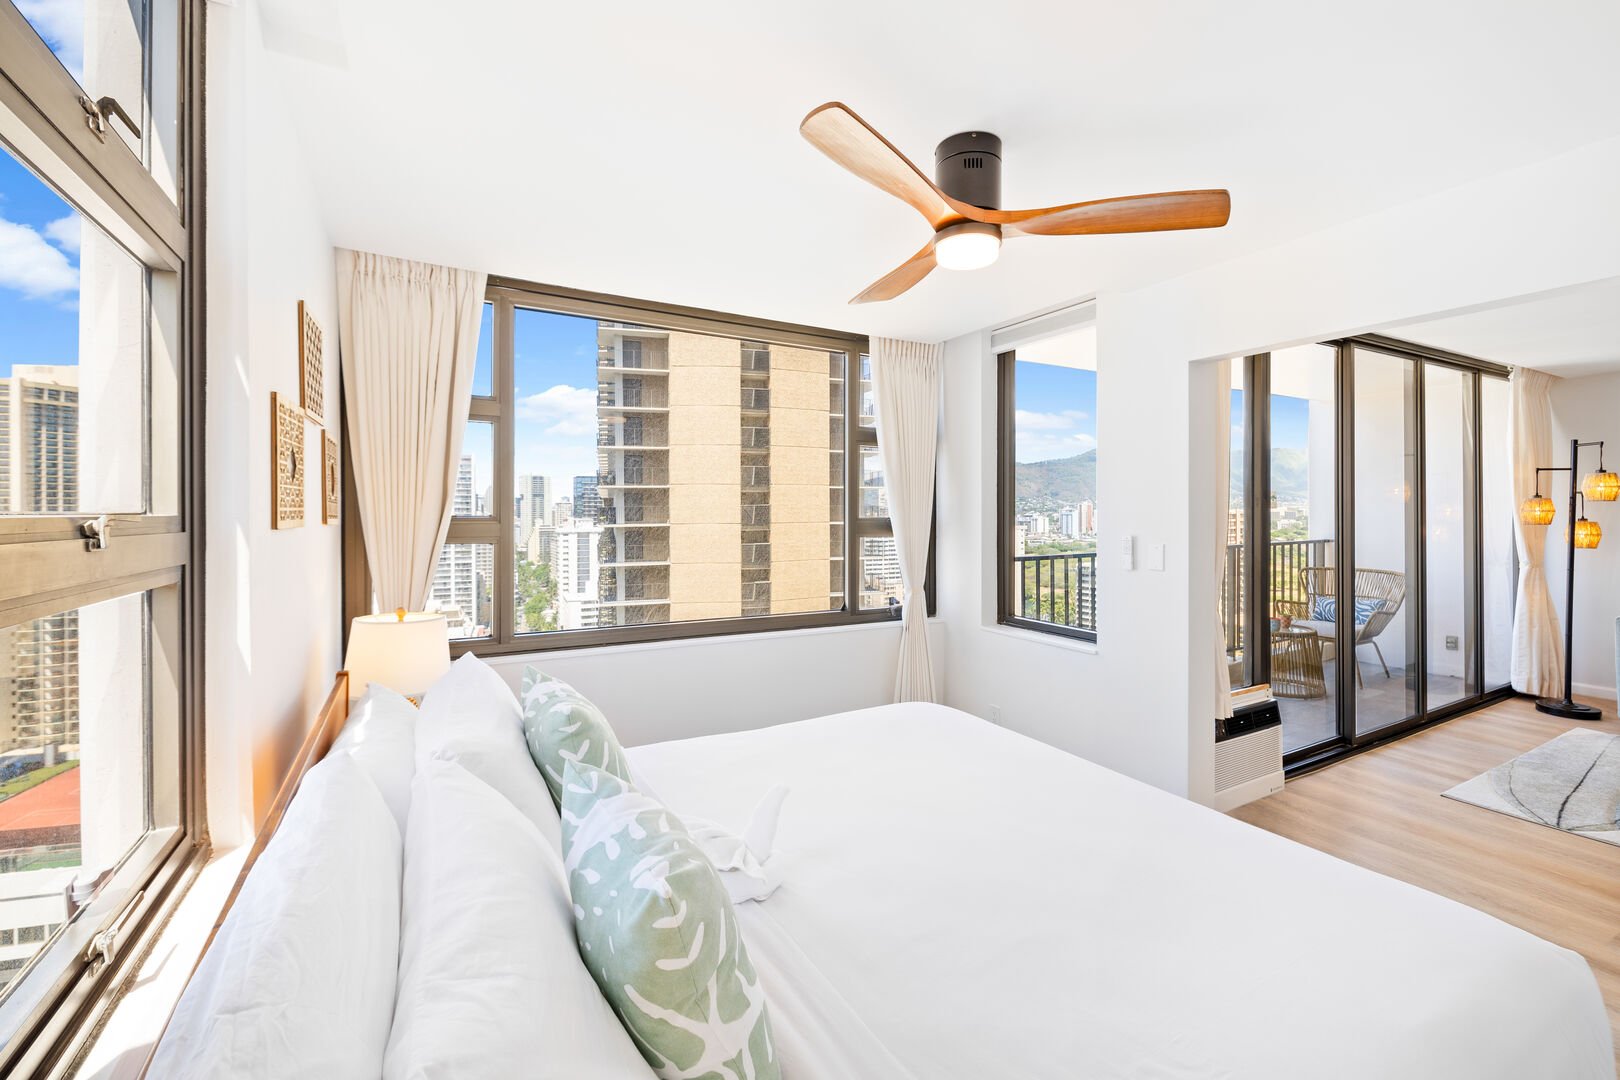 The bedroom has a king-size bed and ceiling fan to keep your cool!